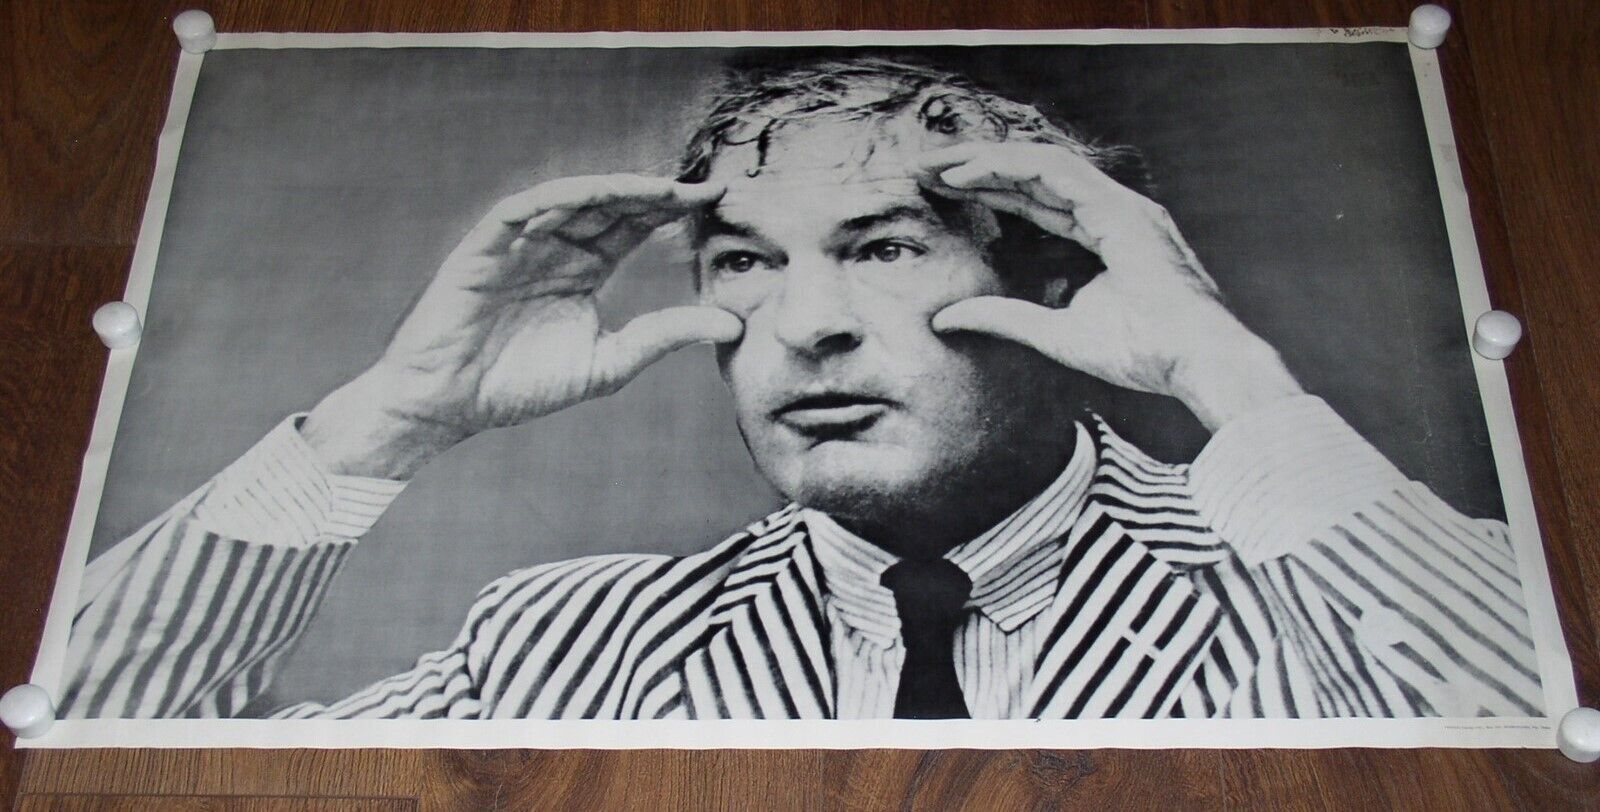 Primary image for TIMOTHY LEARY POSTER VINTAGE FAMOUS FACES 1960'S